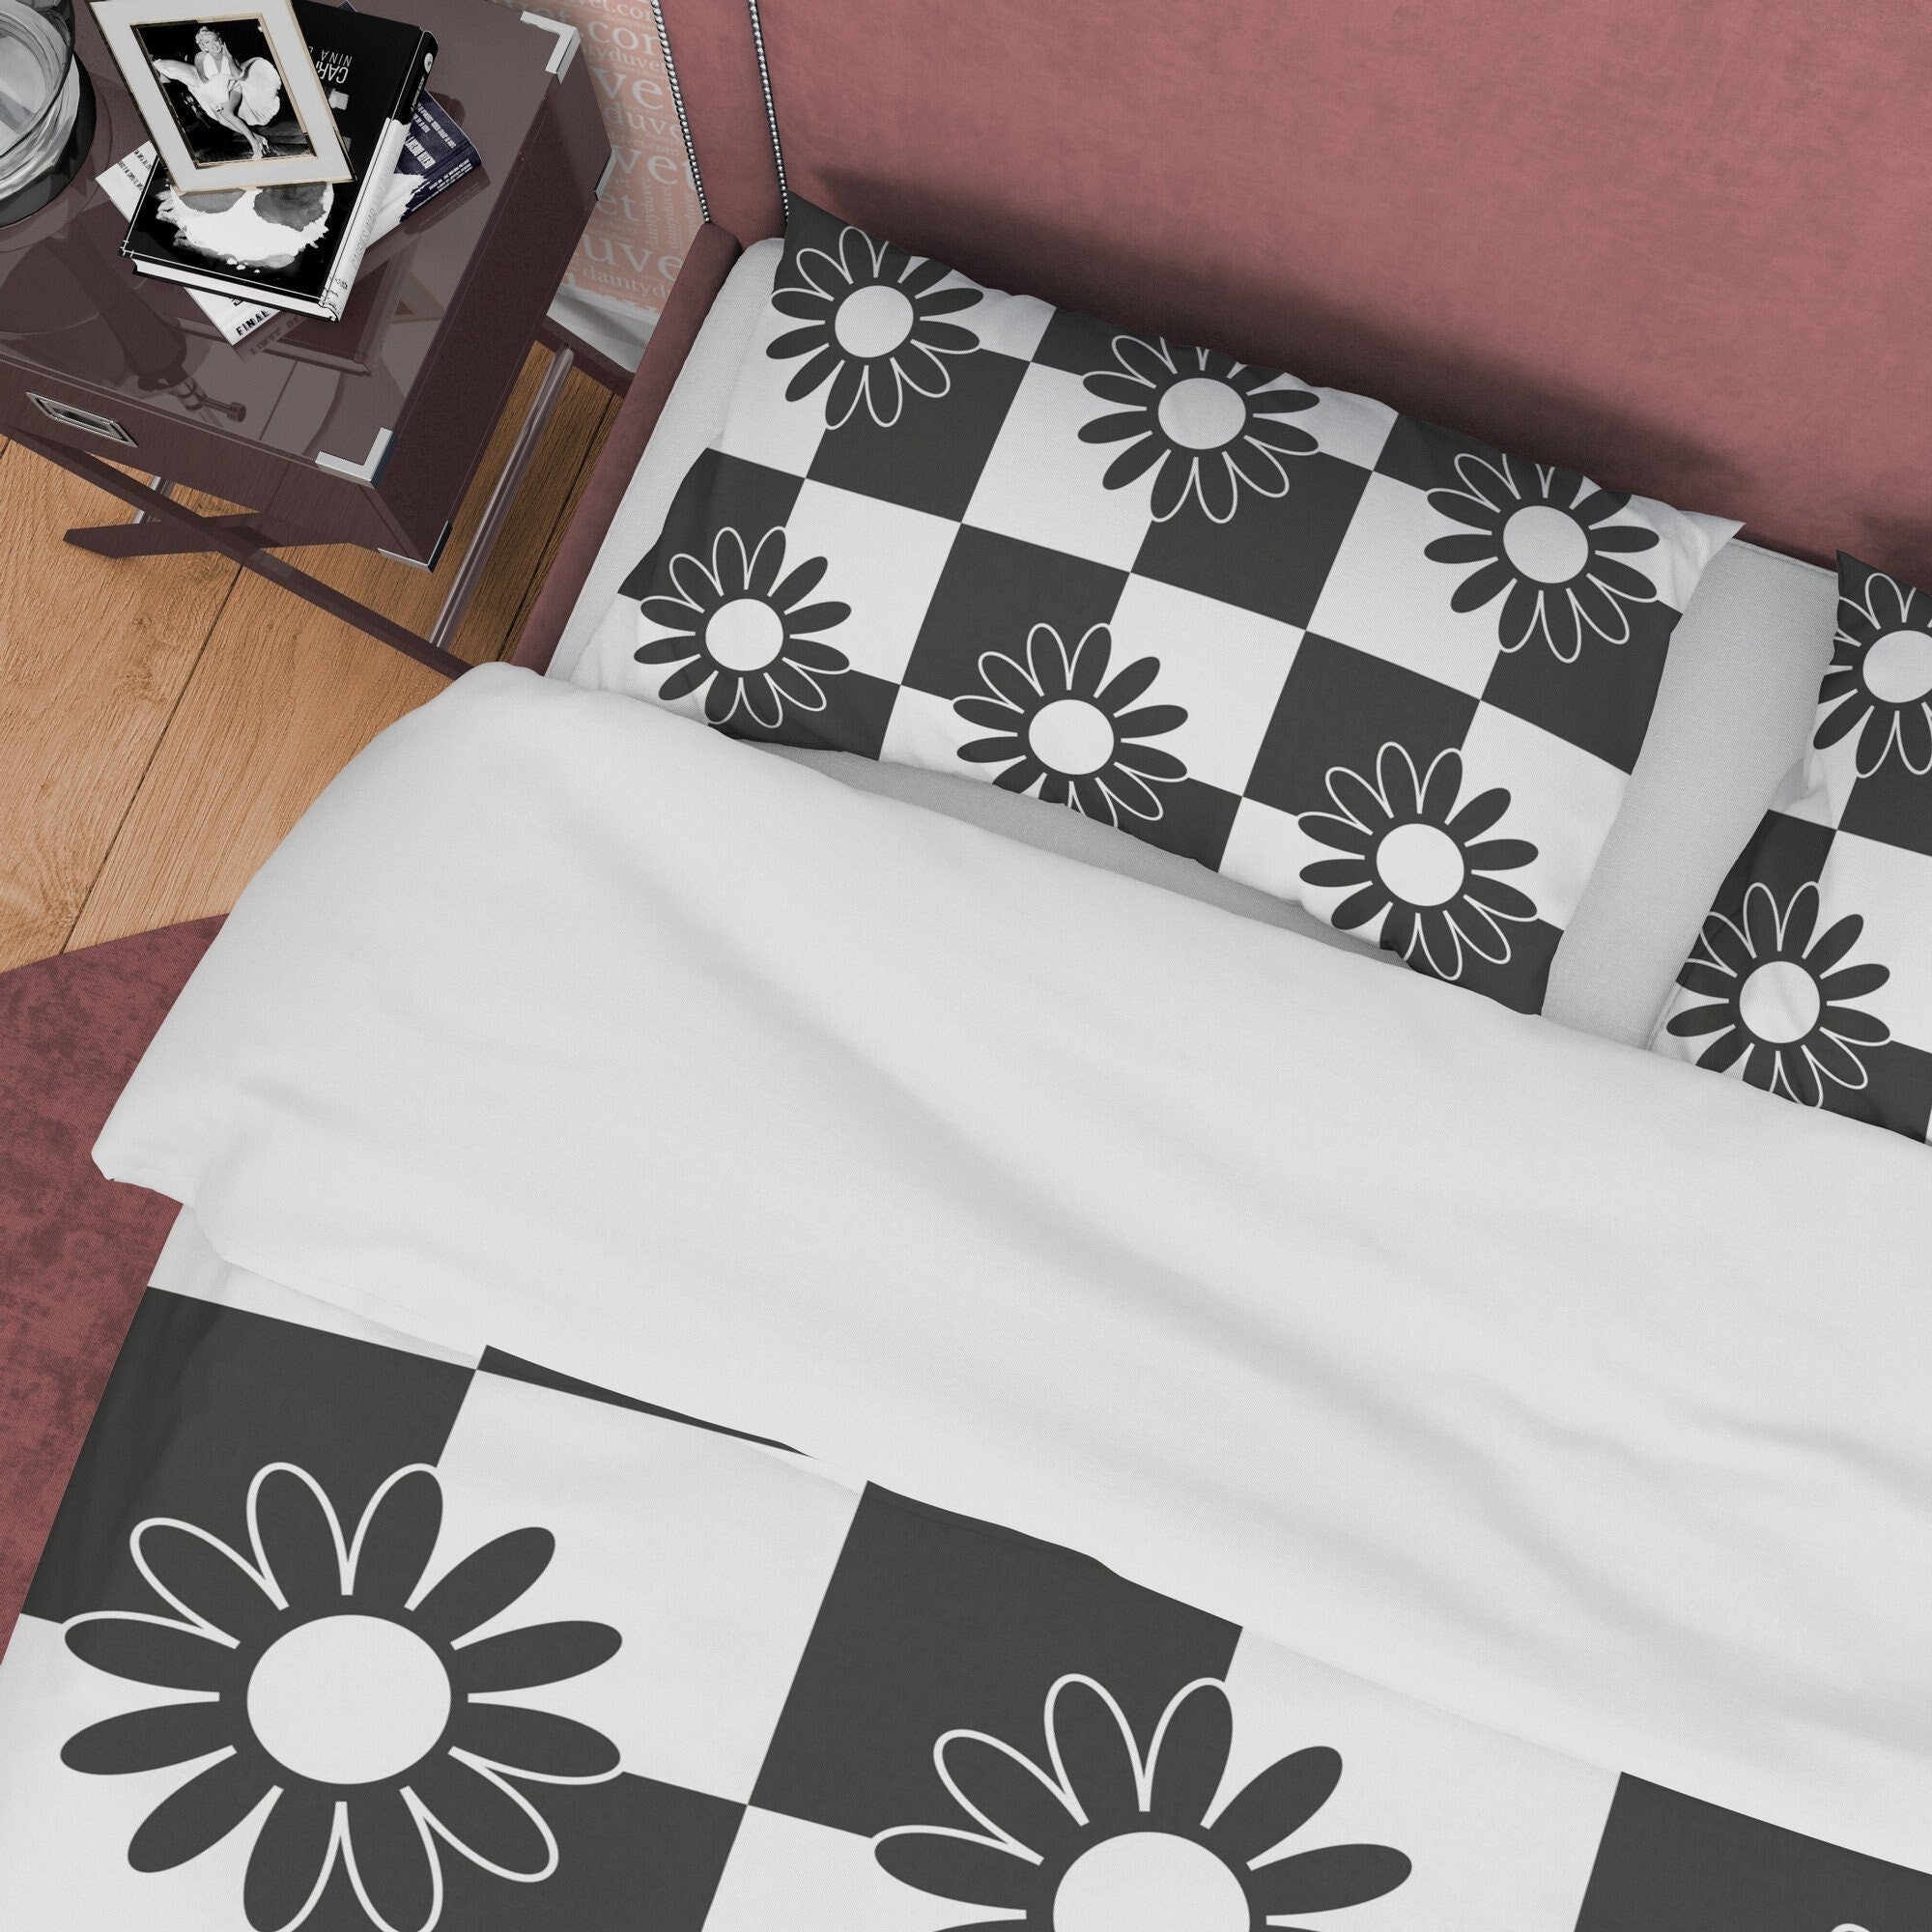 Floral Black and White Duvet Cover Set, Checkered Blanket Cover Retro Printed Bedding Set, Groovy Bedspread, 90s Nostalgia Quilt Cover